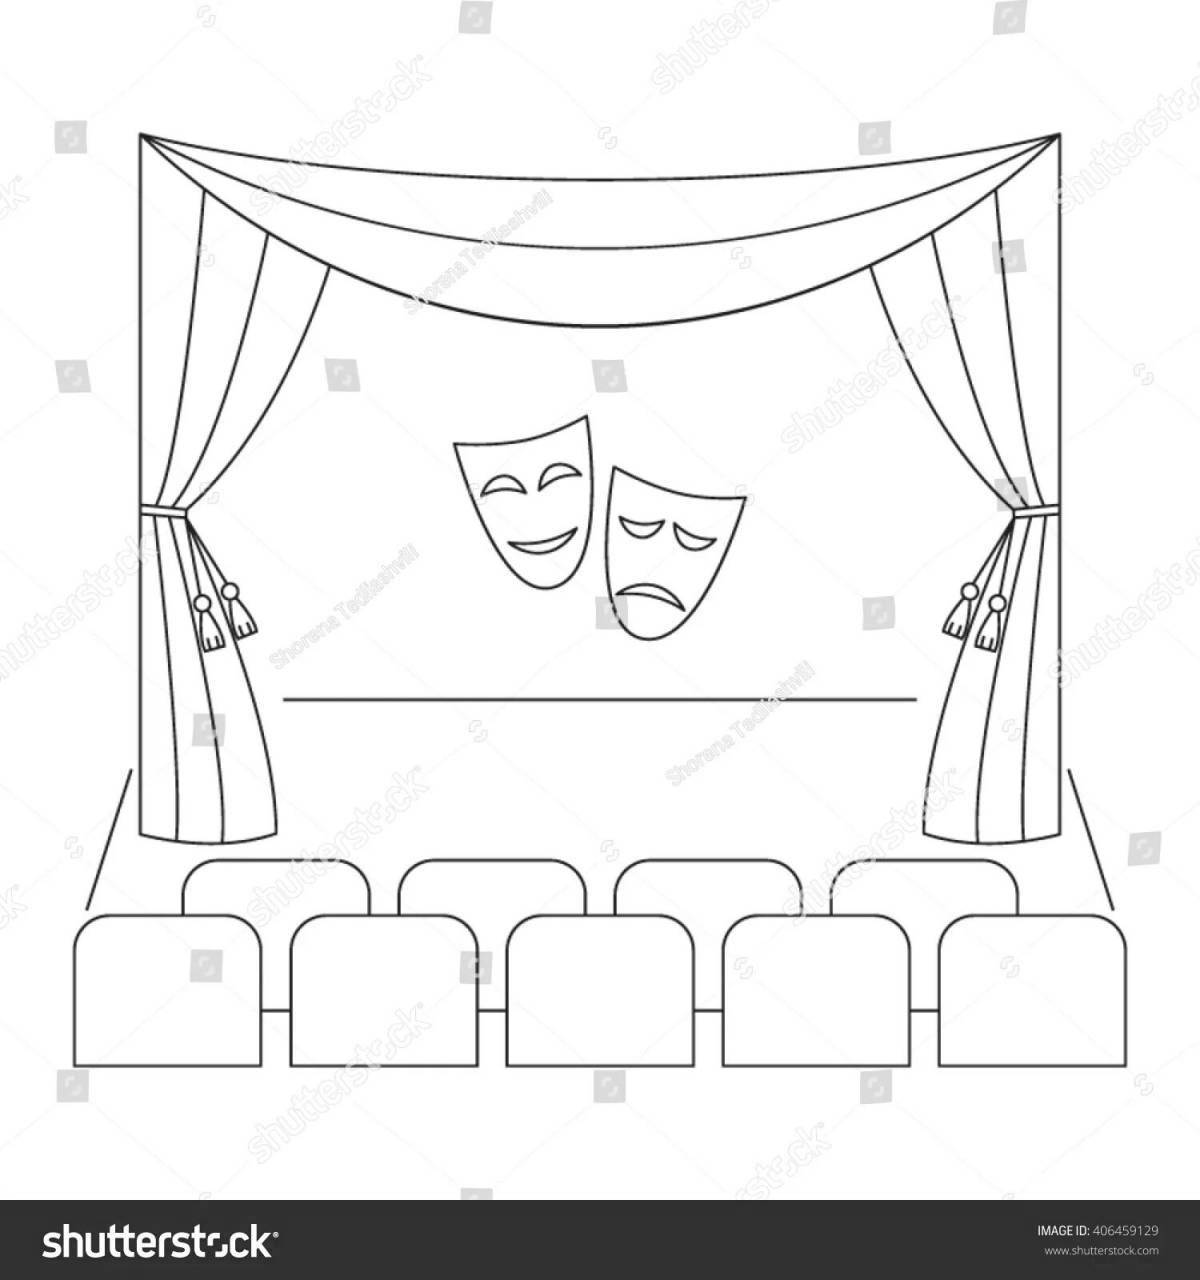 Coloring page decorated theater curtain